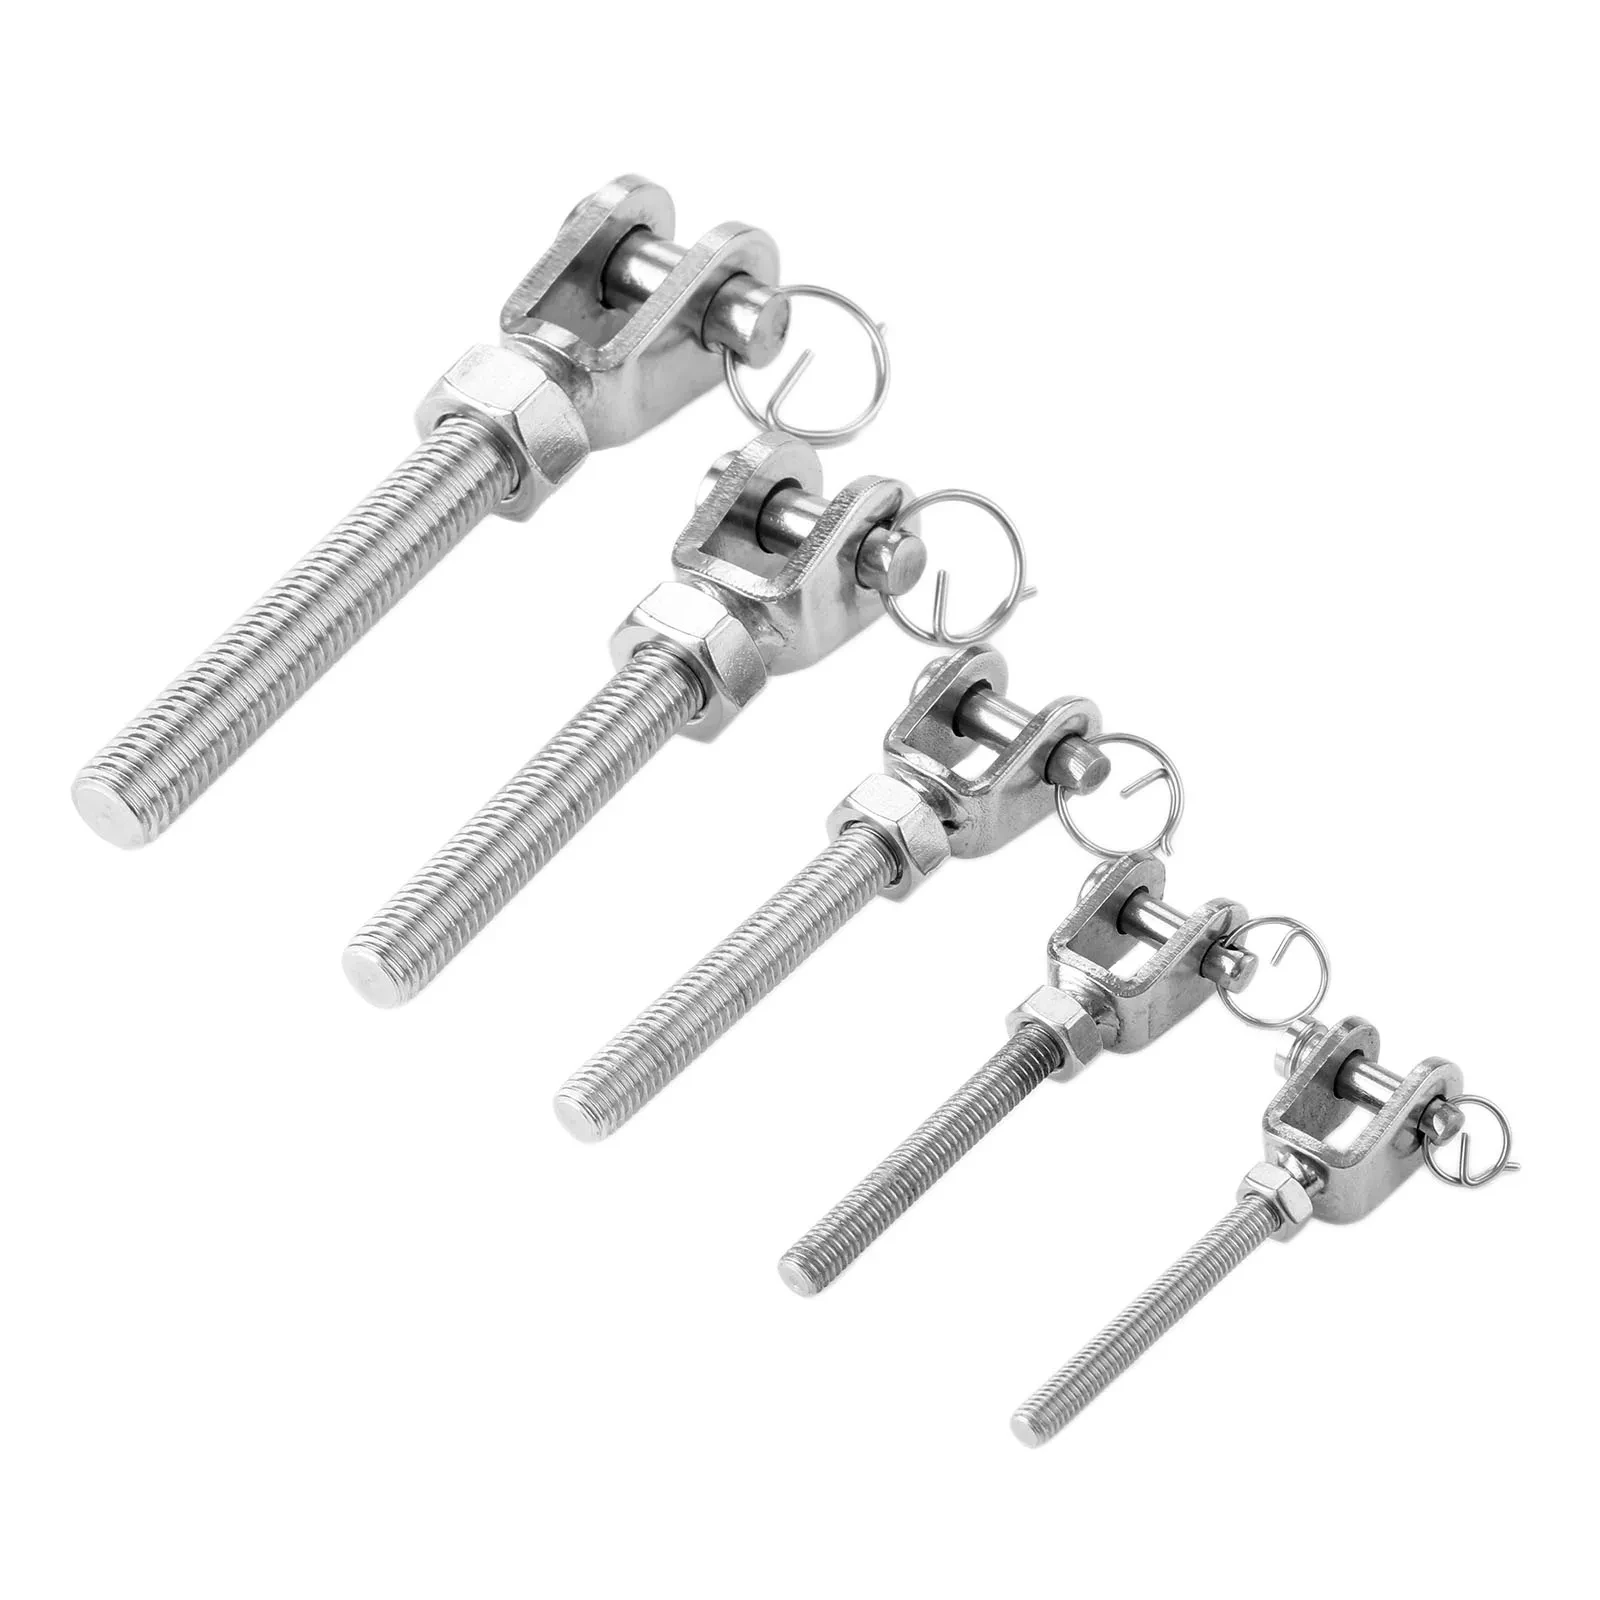 1Pc M5 M6 M8 M10 M12 304 Stainless Steel Jaw Open Bolt & Nut Replacement Turnbuckle Rigging Screw Parts